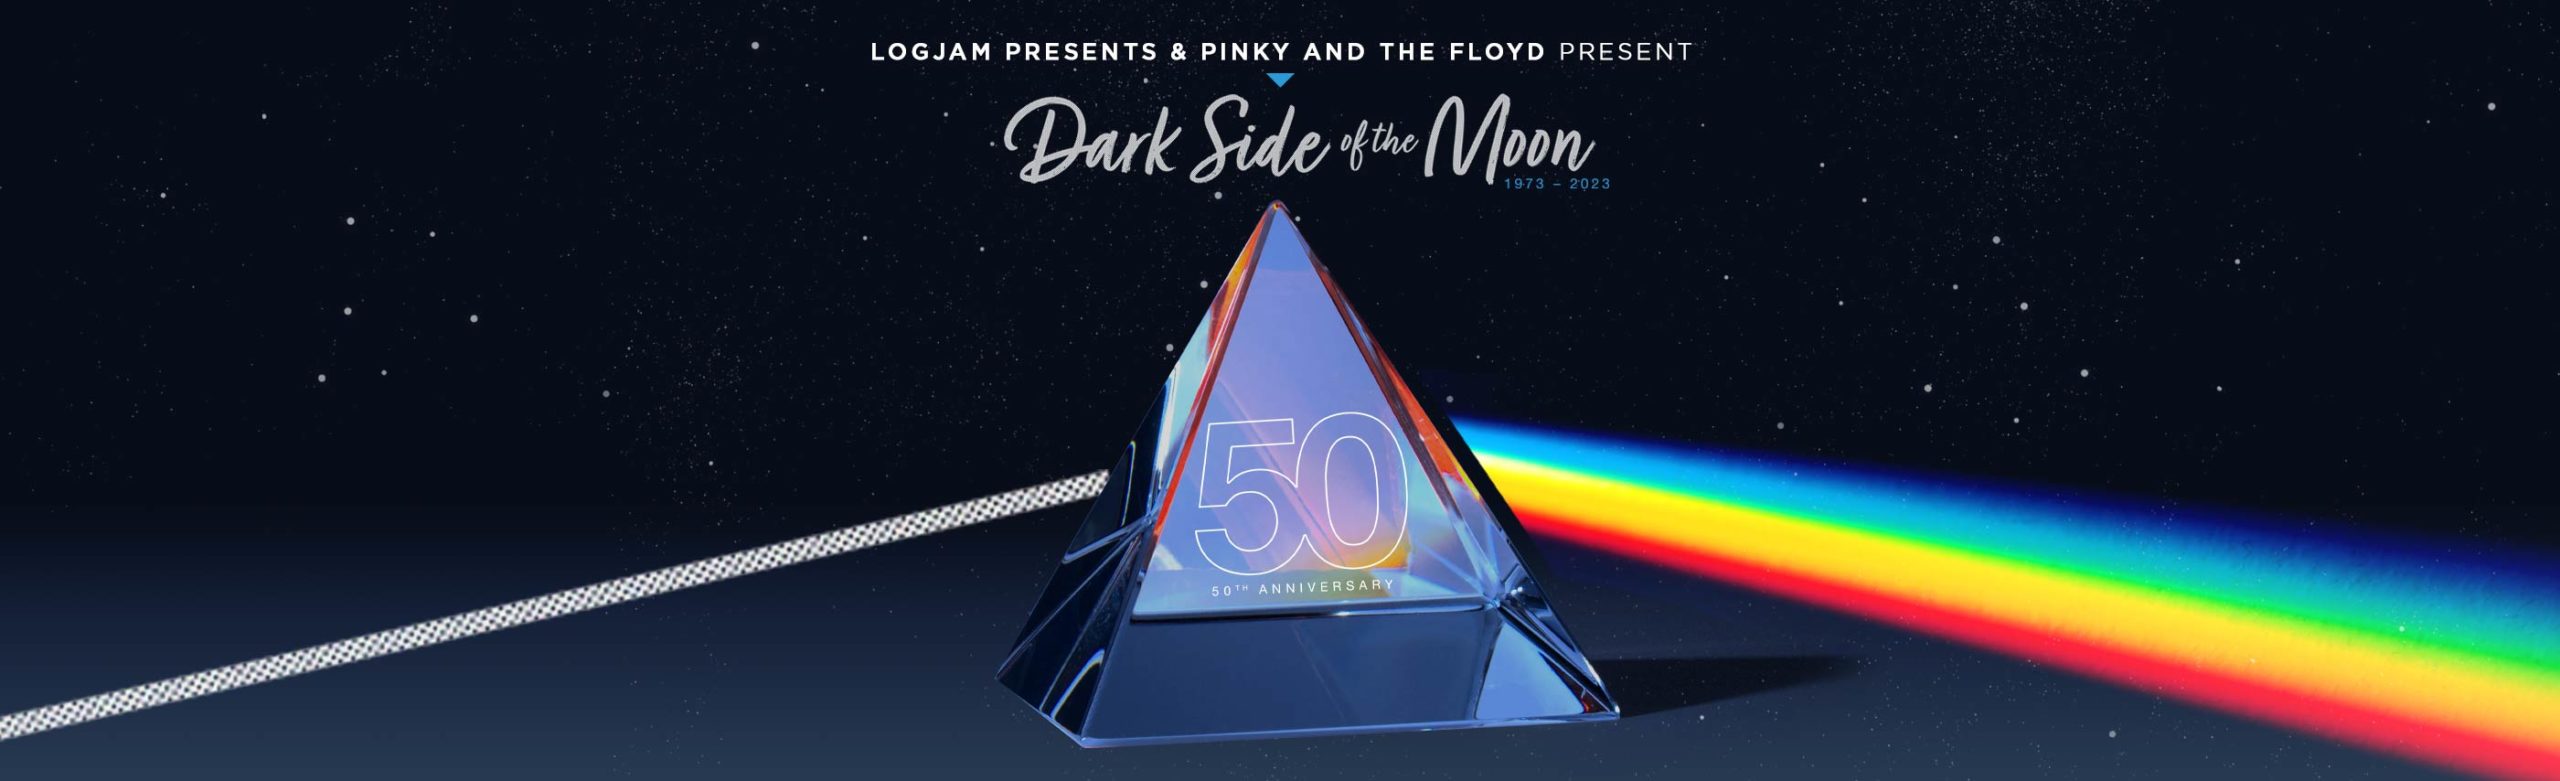 Pinky and the Floyd to Celebrate 50th Anniversary of “The Dark Side of the Moon” Image